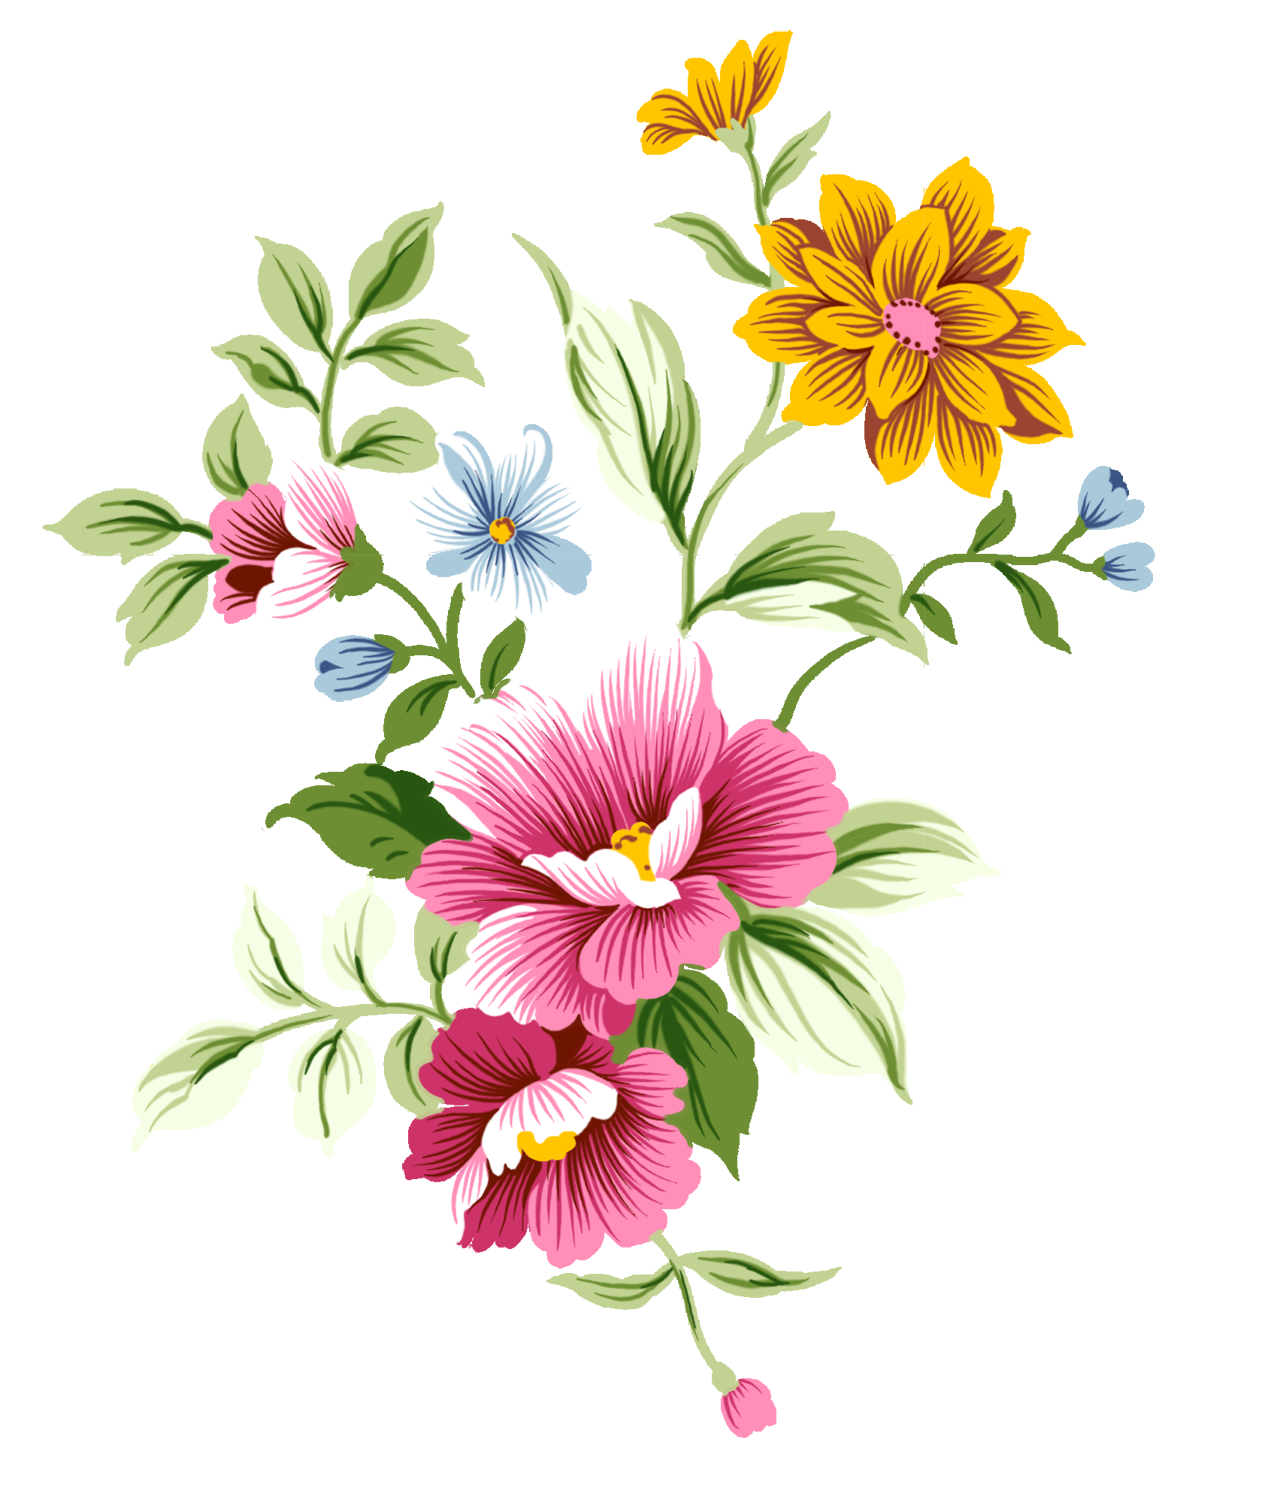 Abstract Flower Picture Png Image - Flower, Transparent background PNG HD thumbnail